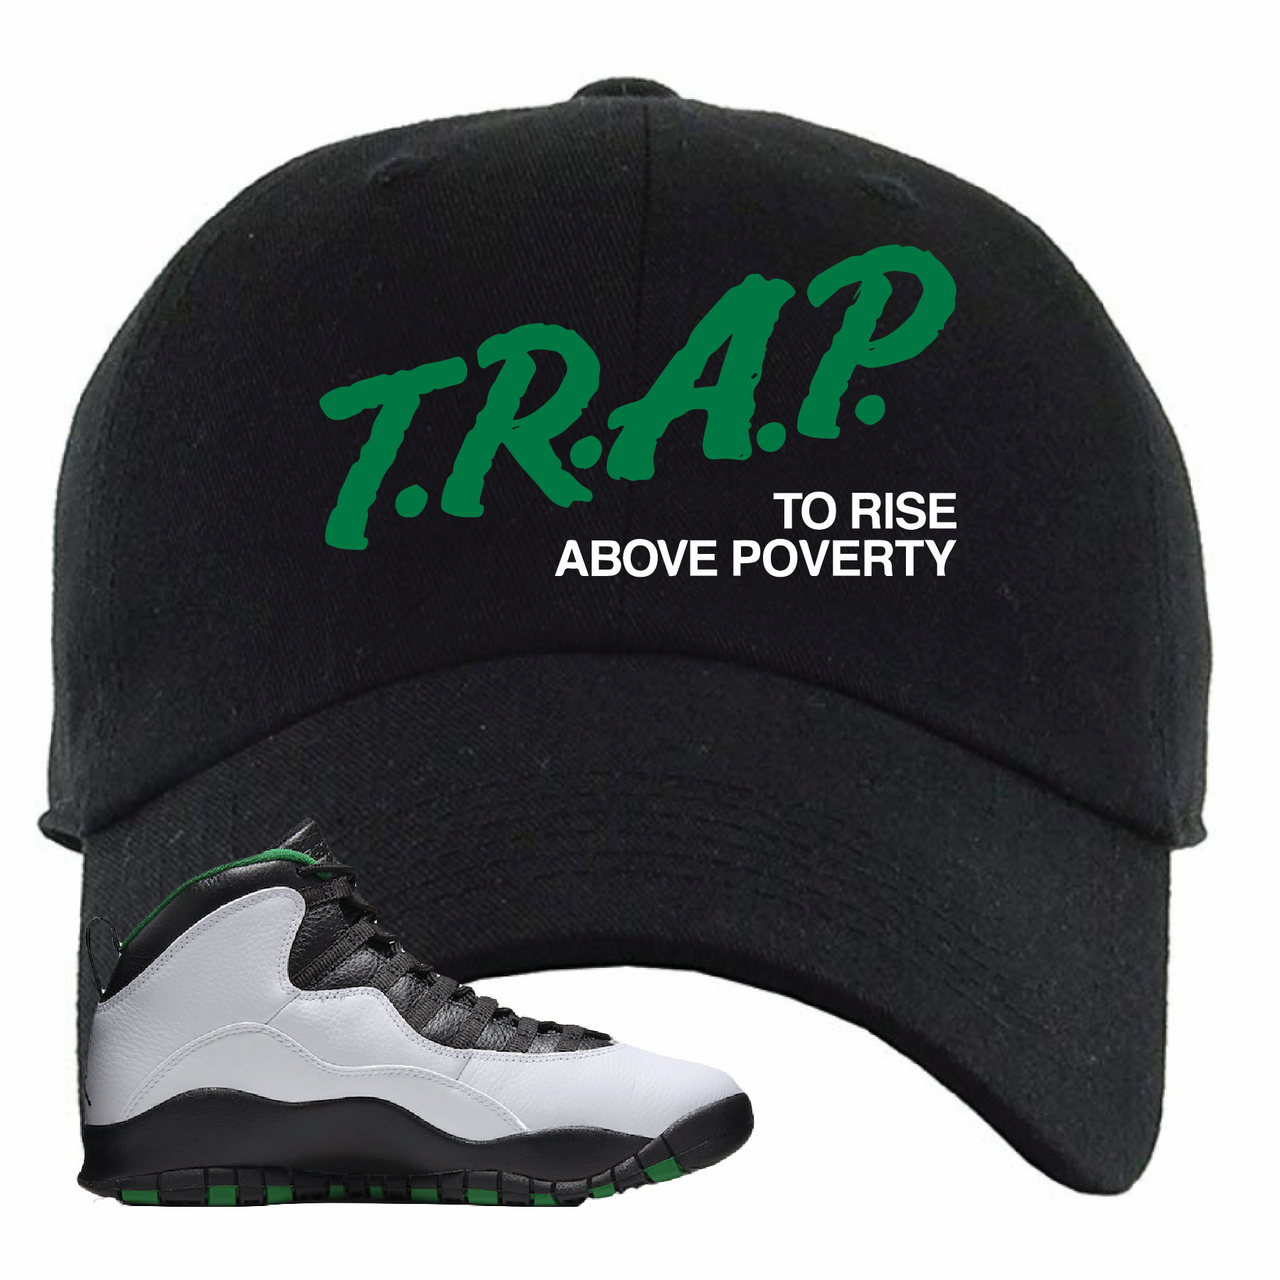 Air Jordan 10 Seattle SuperSonics Trap to Rise Above Poverty Black Sneaker Matching Dad Hat